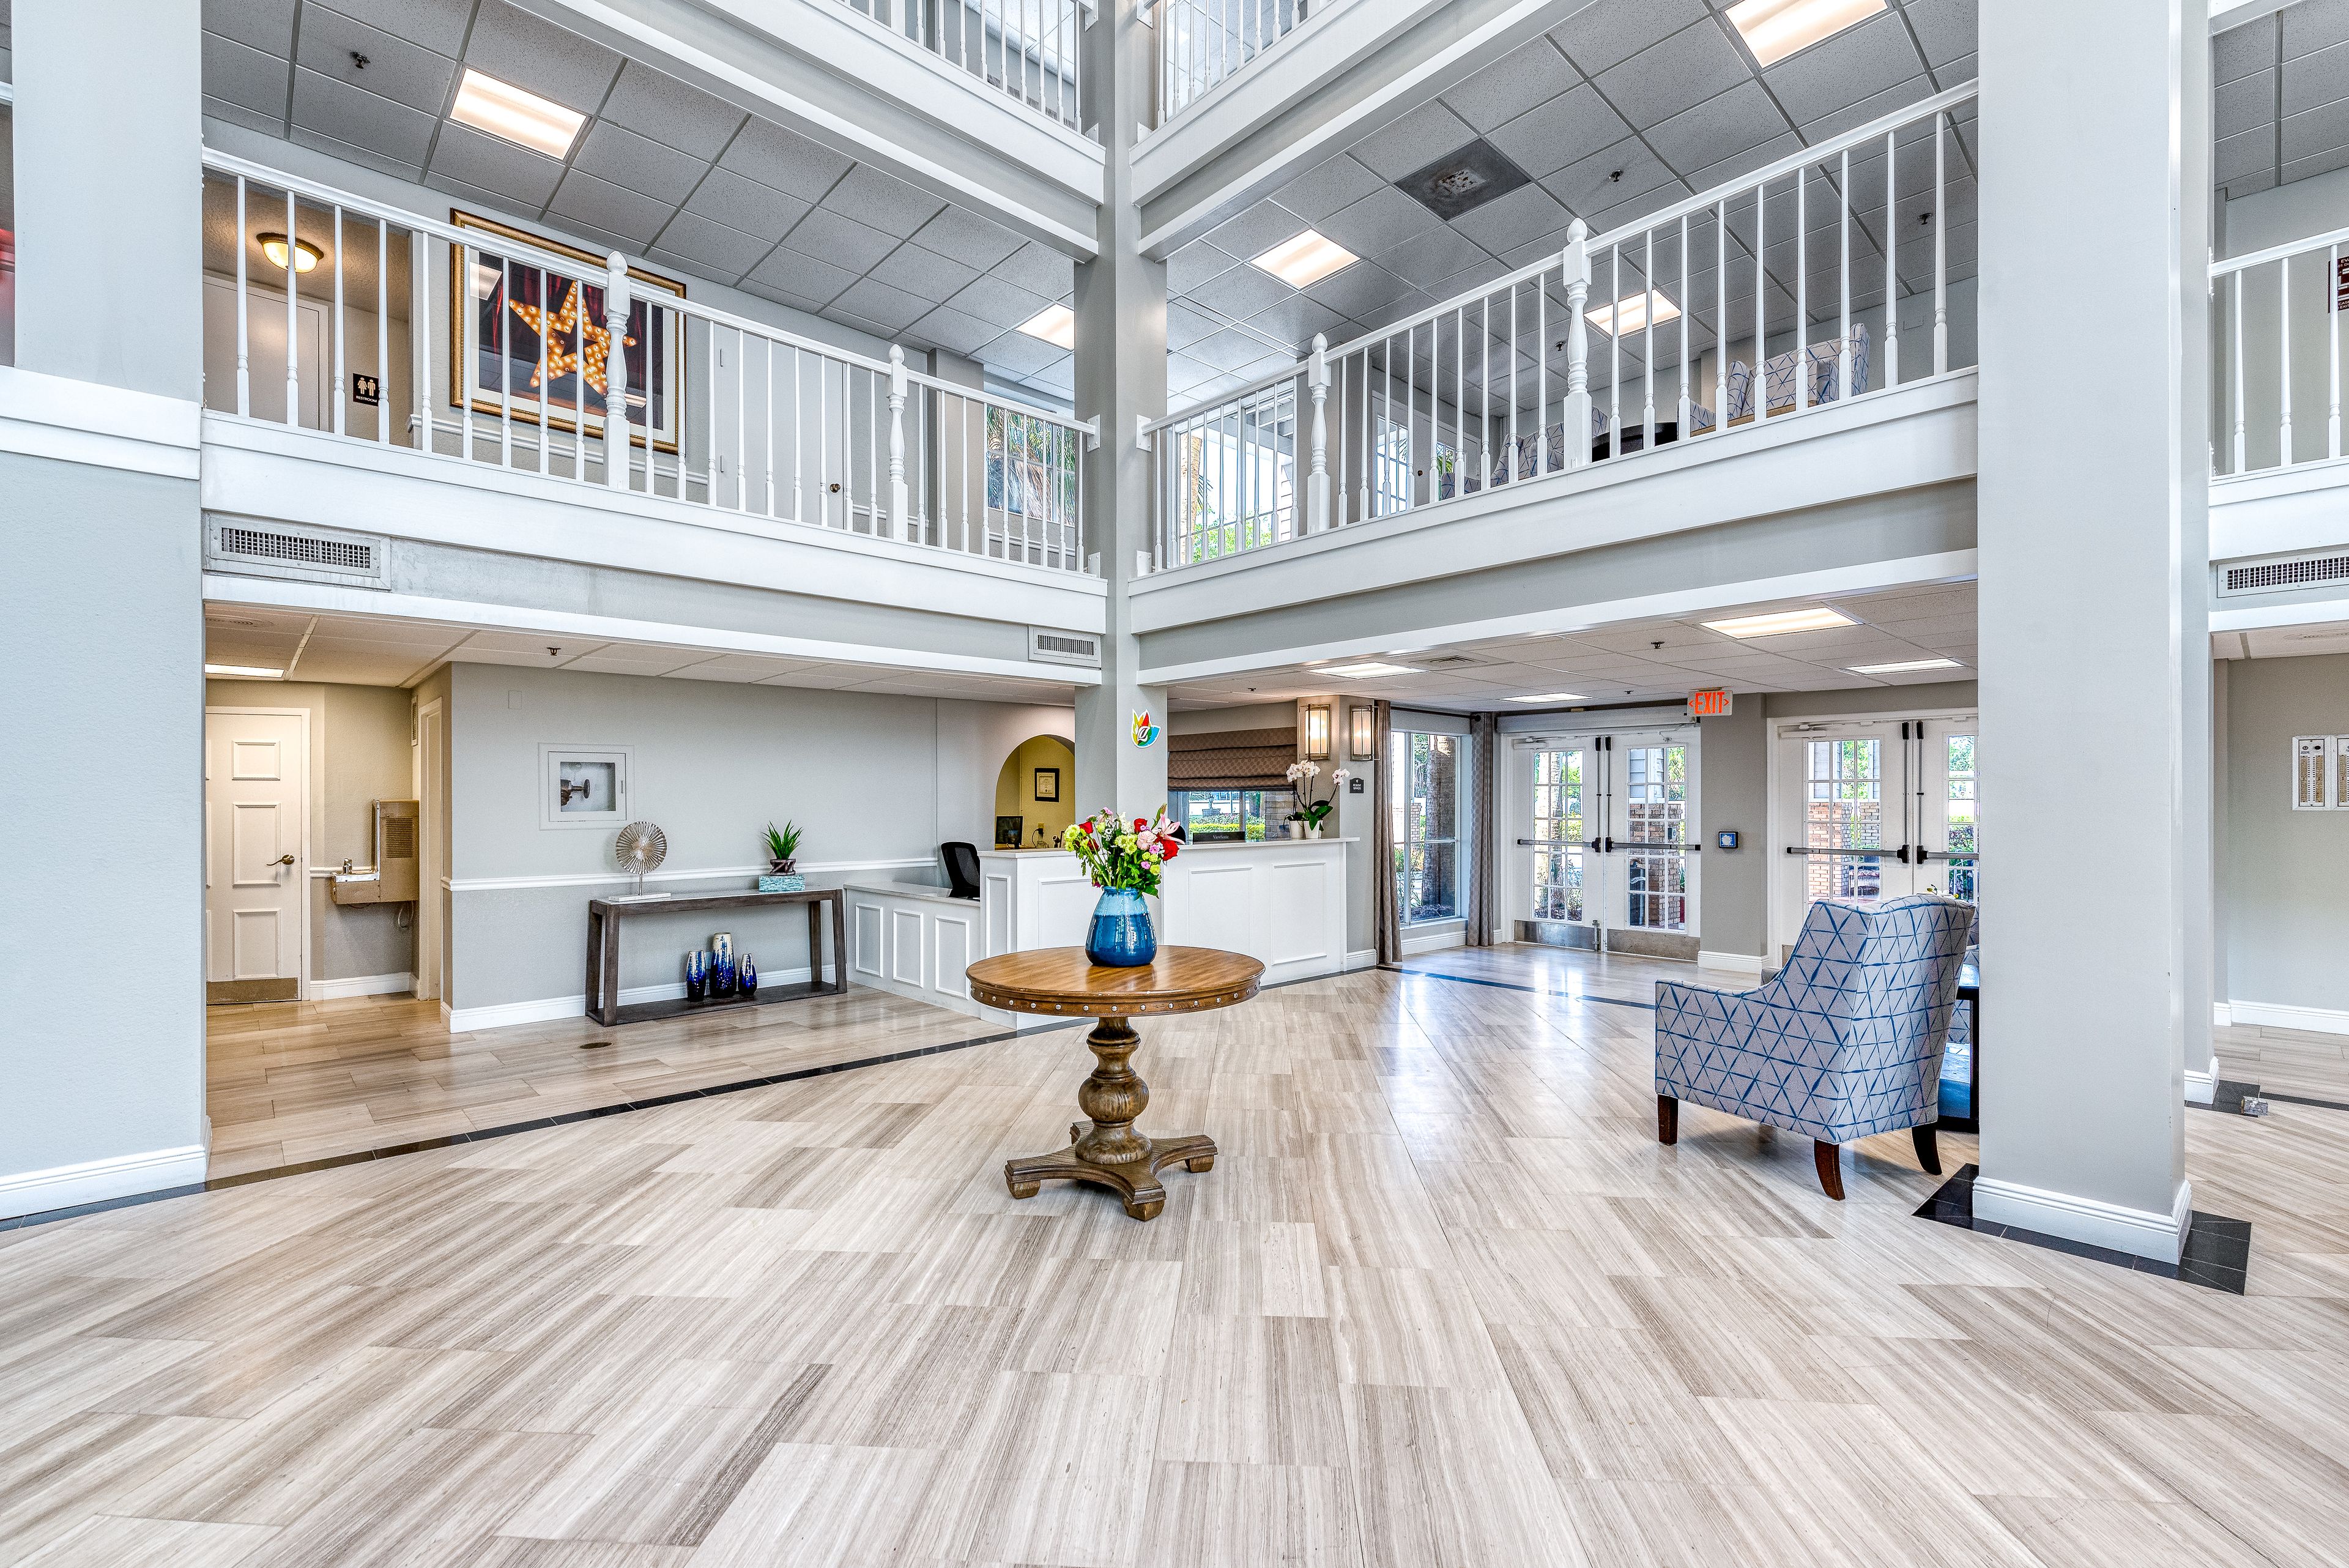 Interior view of The Meridian At Lantana senior living community featuring modern architecture and design.